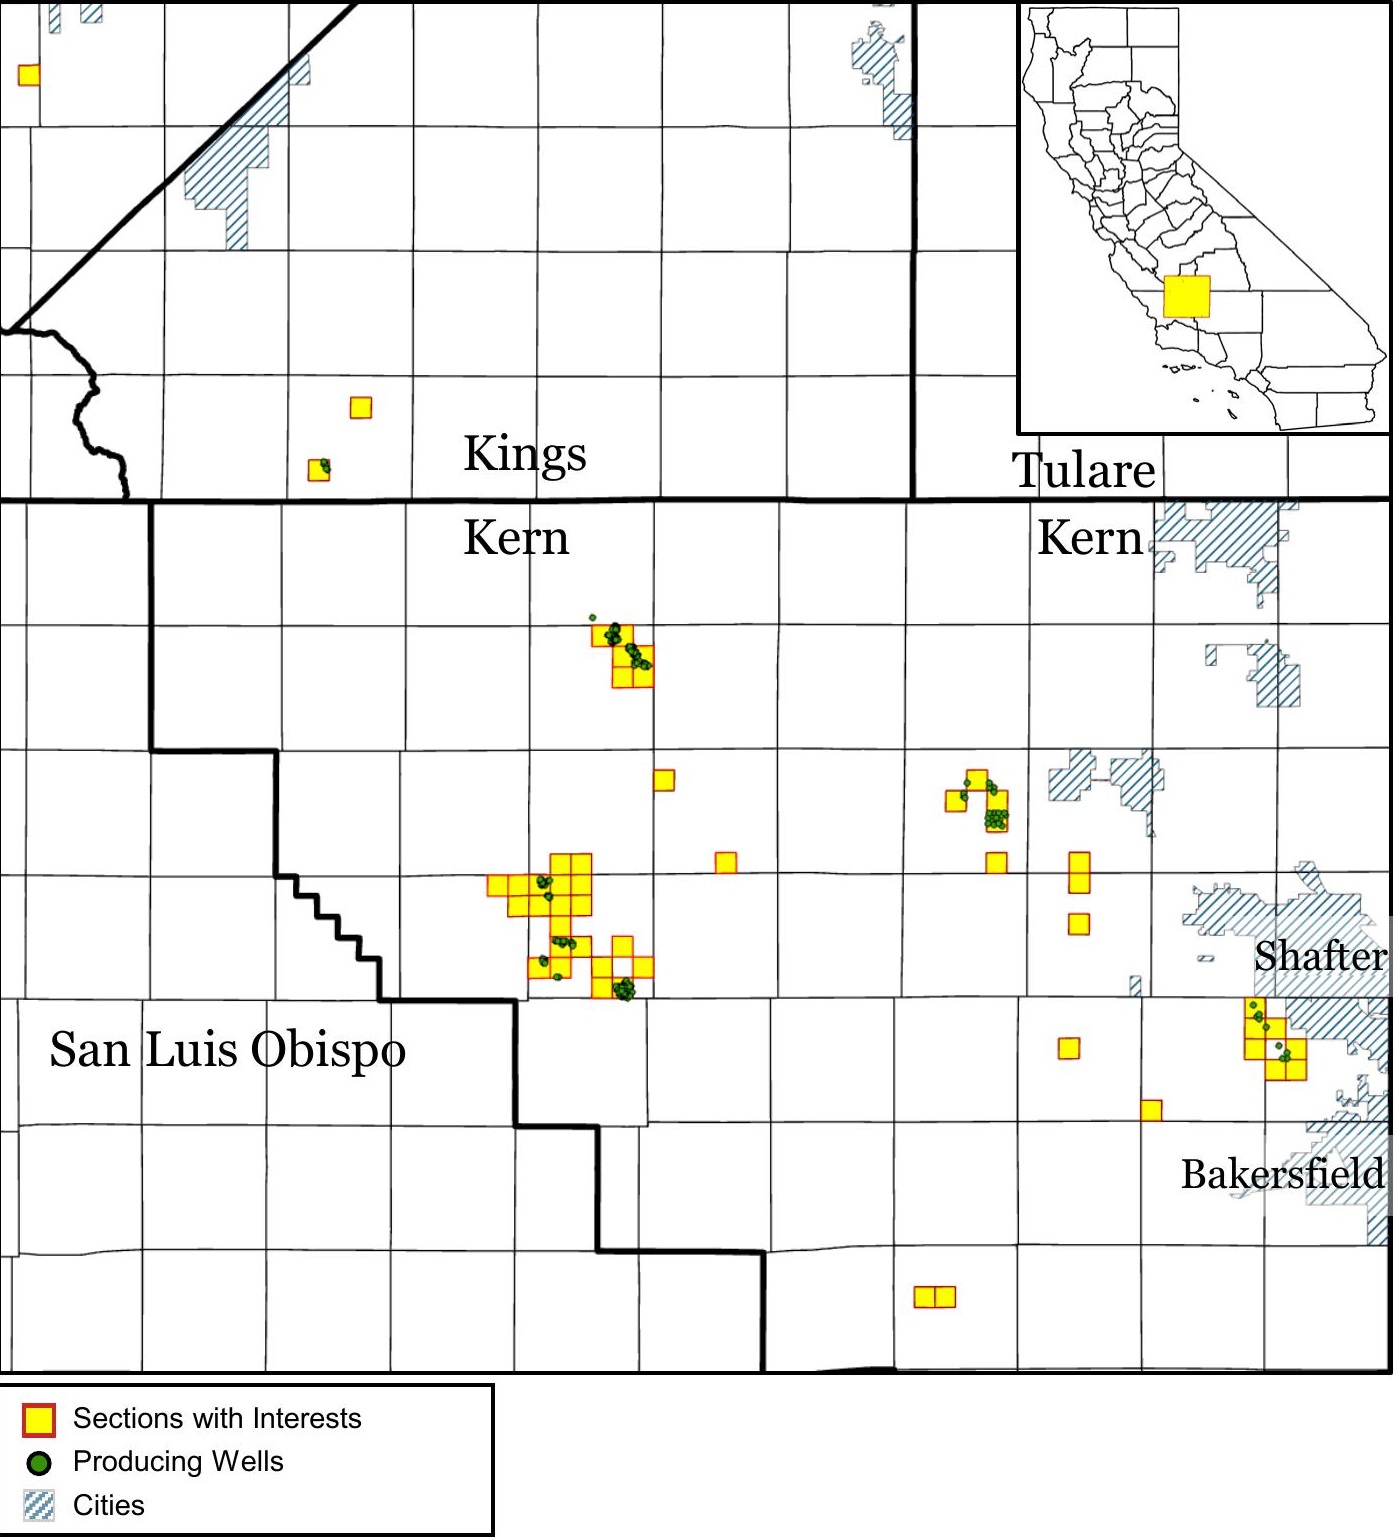 Minerals and Surface in San Joaquin Basin